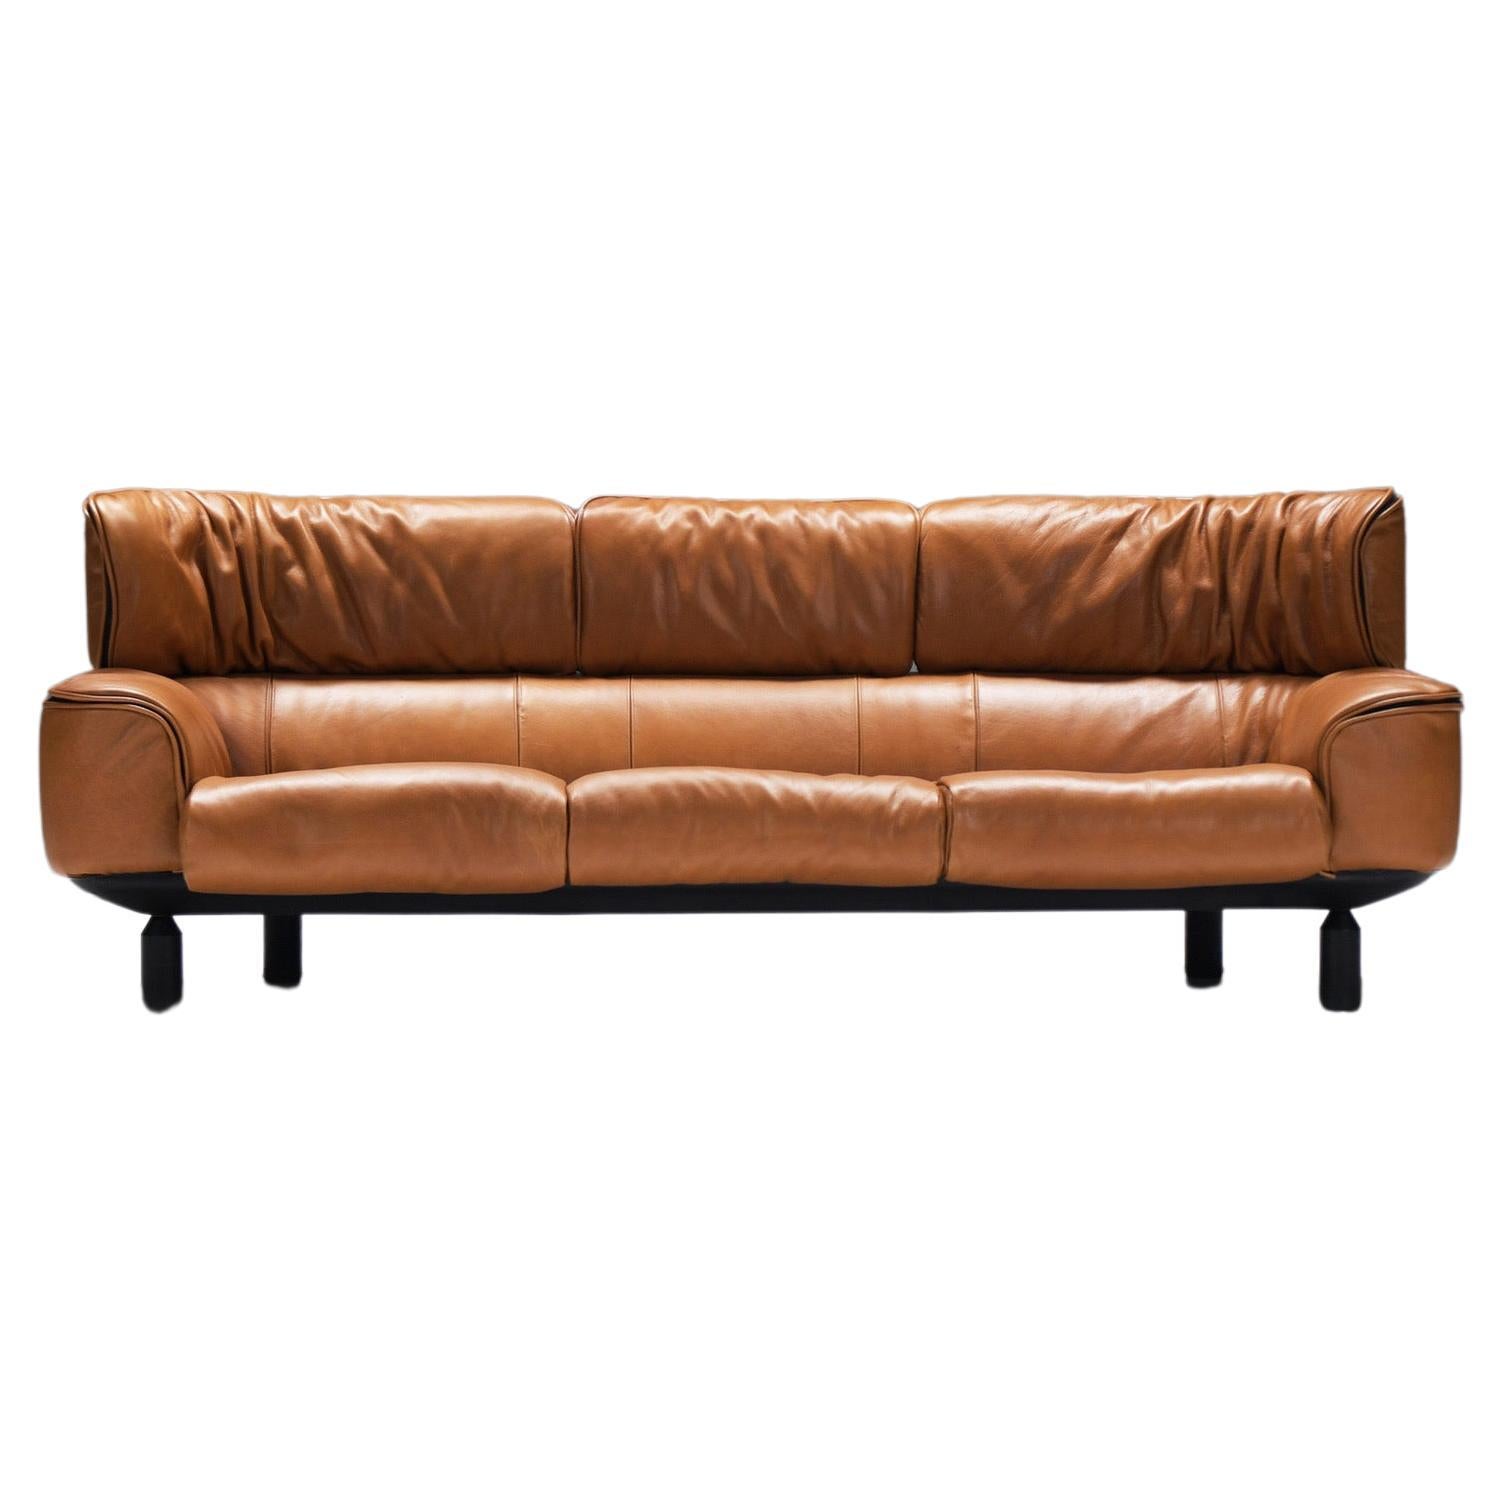 Exceptional Bull sofa (1987) in cognac leather by Gianfranco Frattini - Cassina